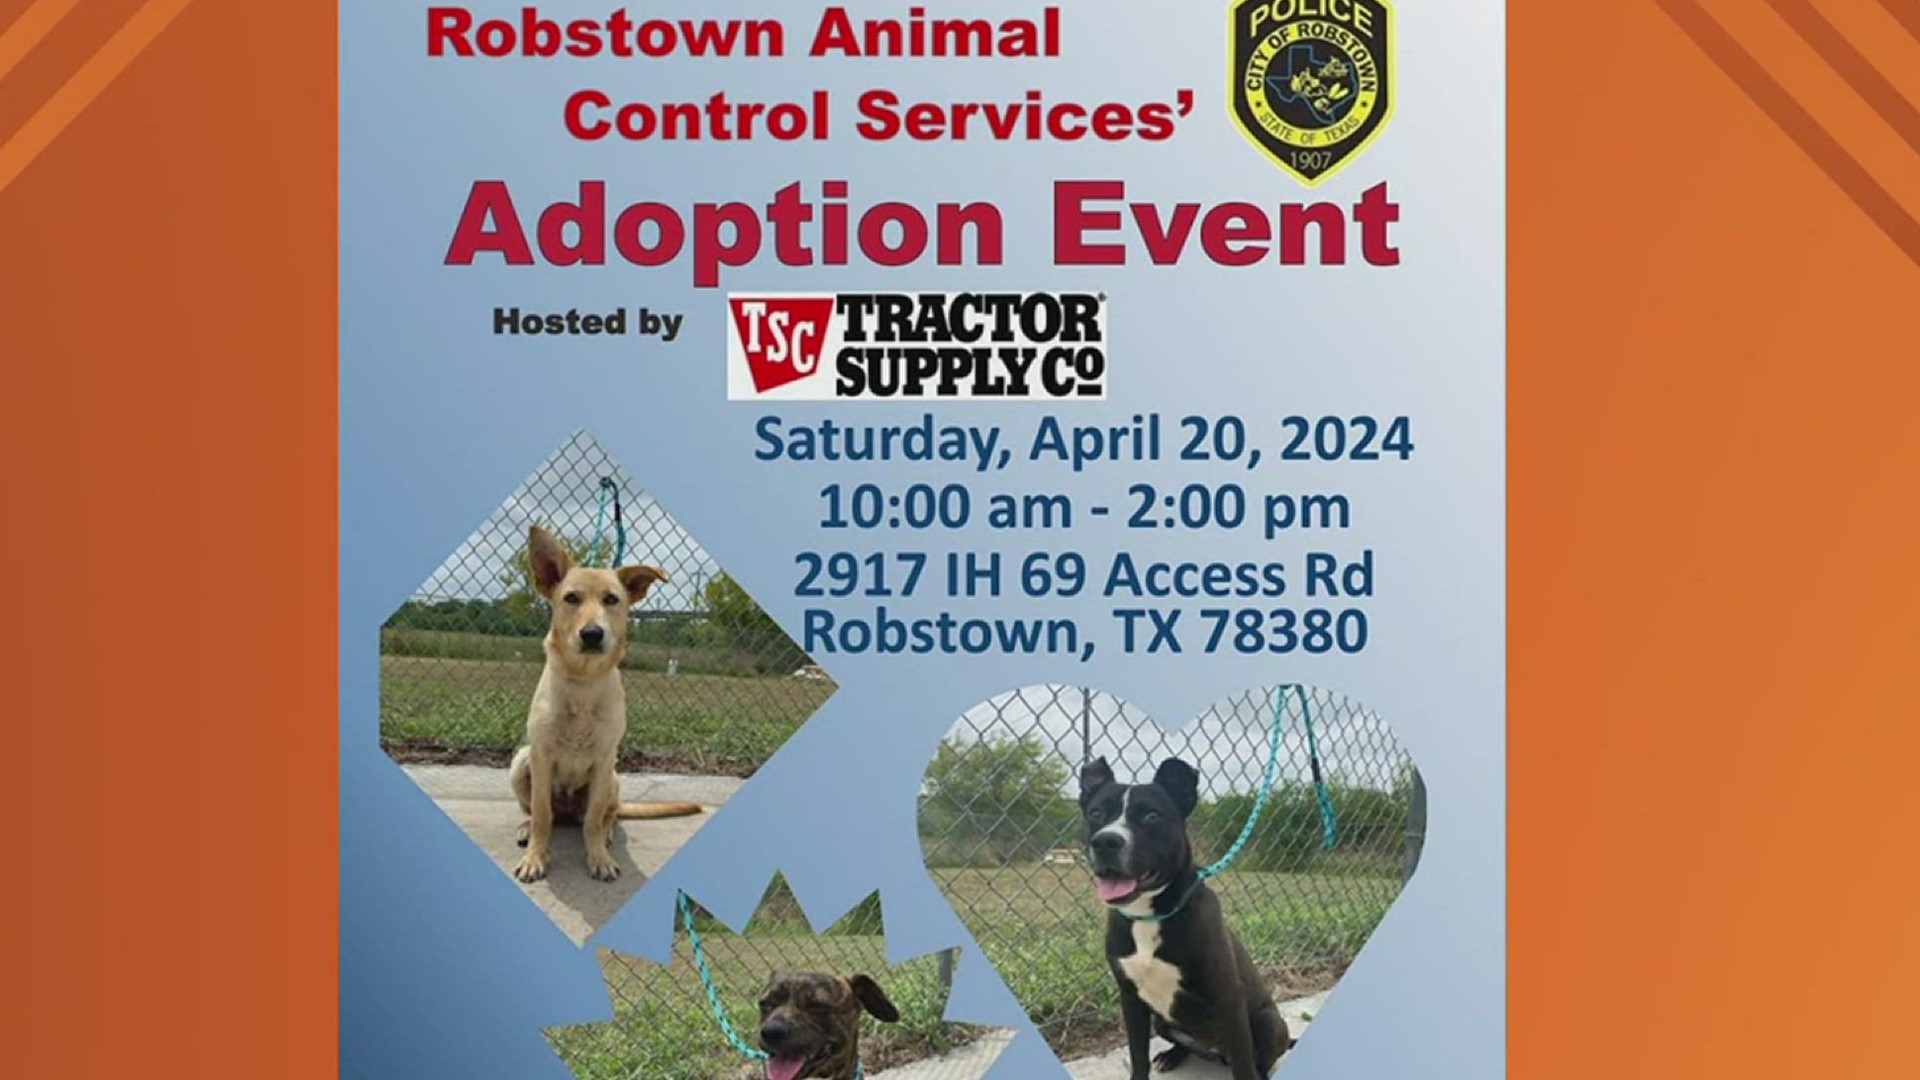 The adoption event is being held in honor of "National Animal Control Officer" week!